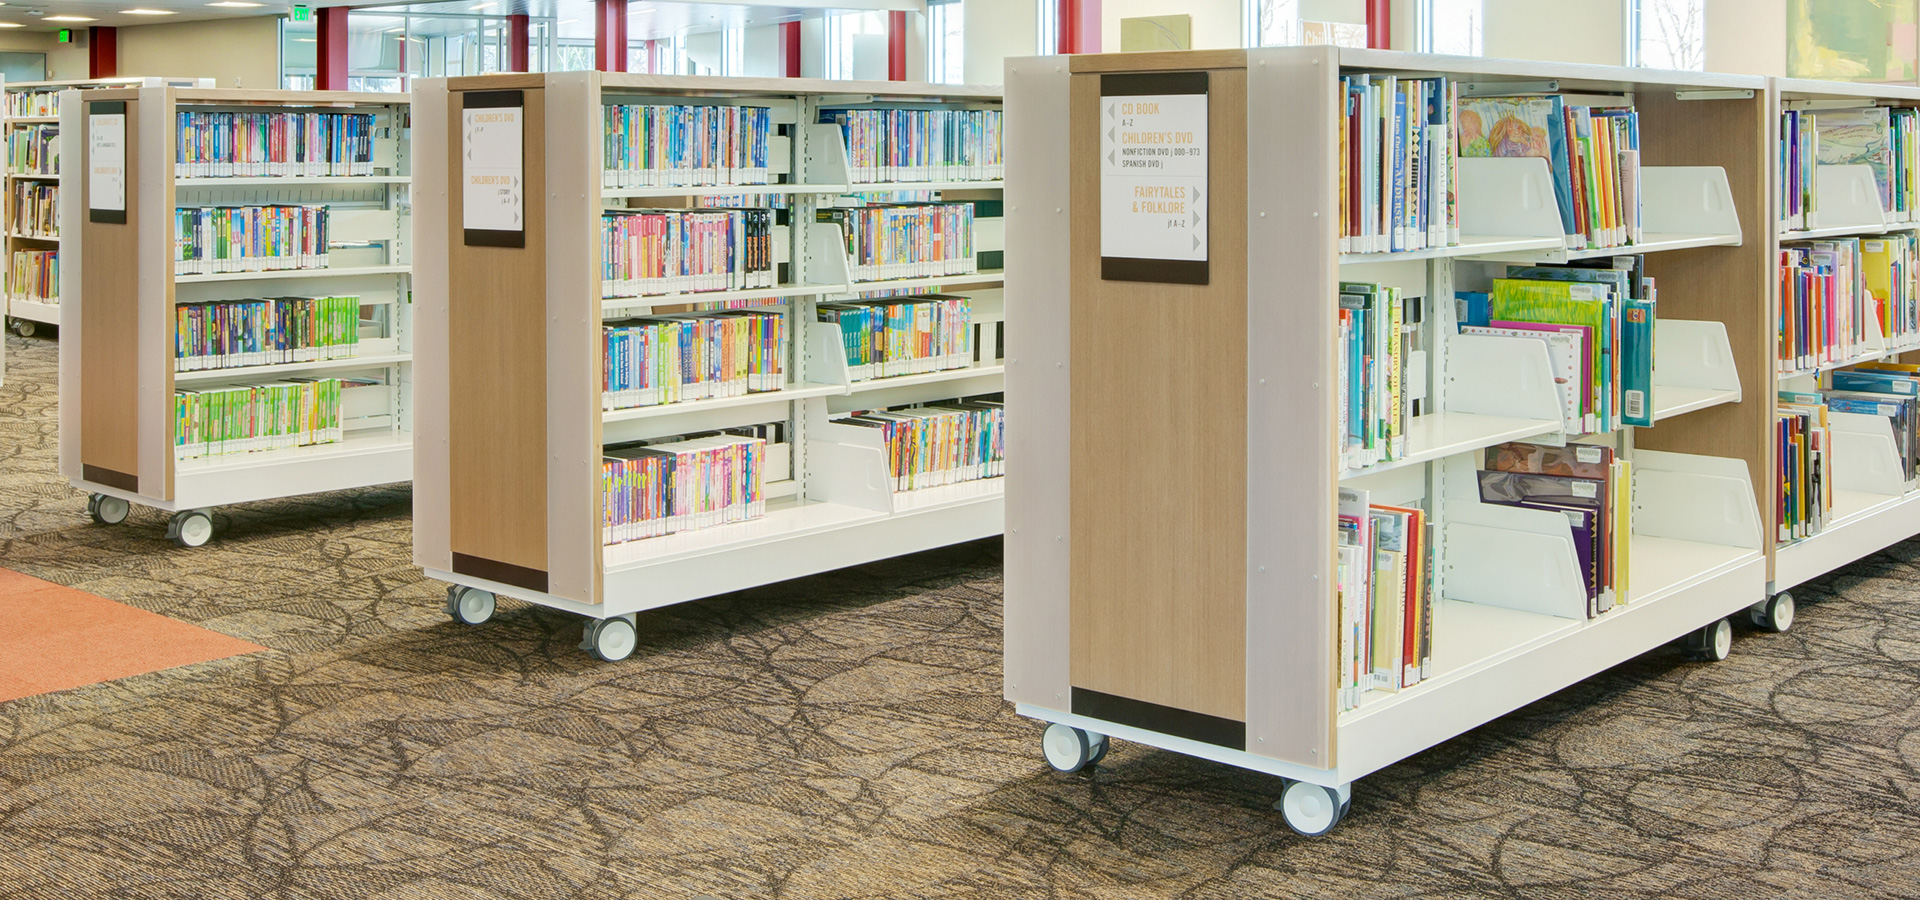 library shelving on wheels